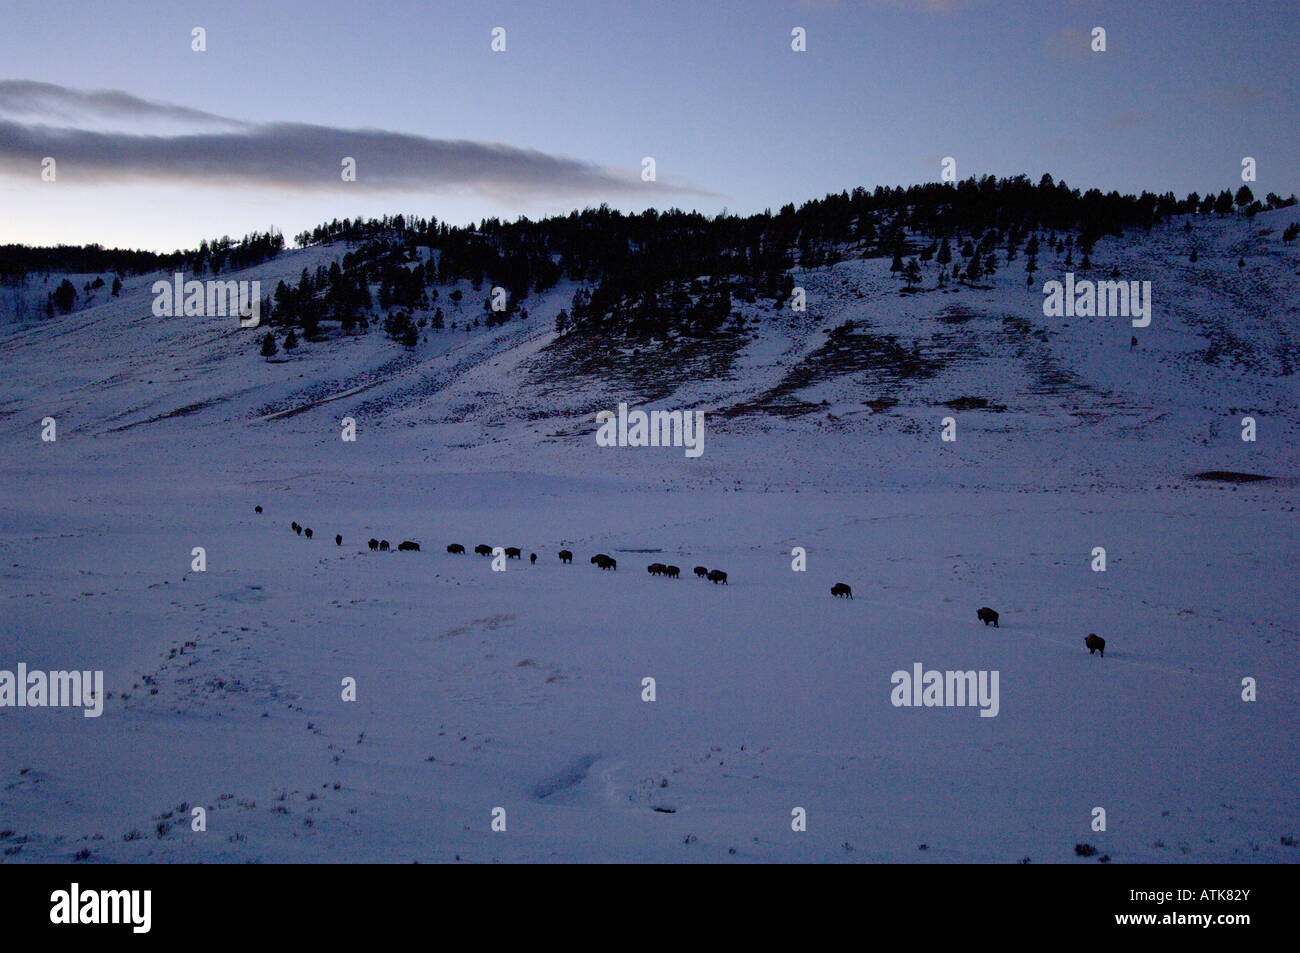 American Buffalo OR Bison,  Bison bison, migrating In snow after sunset Photographed in Yellowstone National Park USA Stock Photo